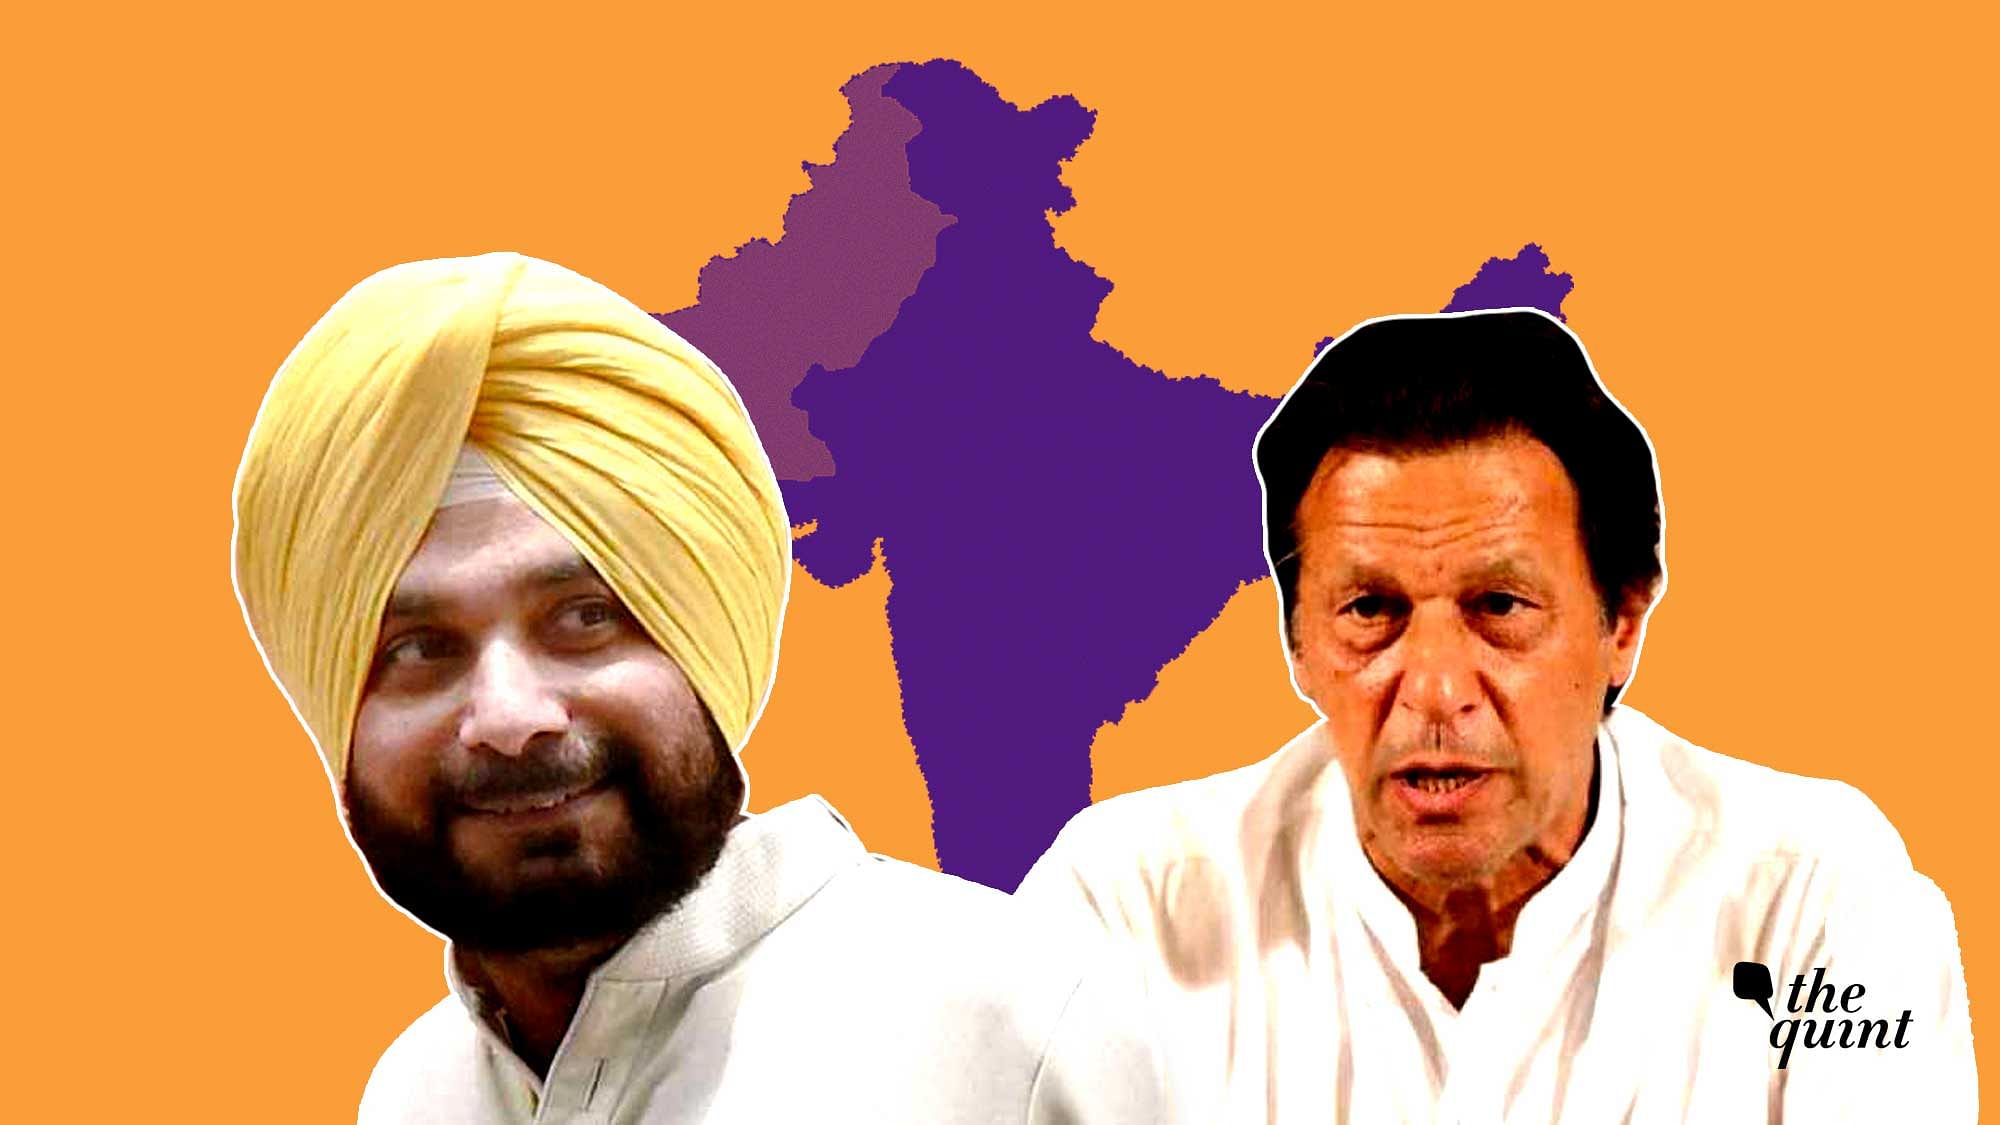 Khan, in his address, said Sidhu can win an election, even in Pakistan.